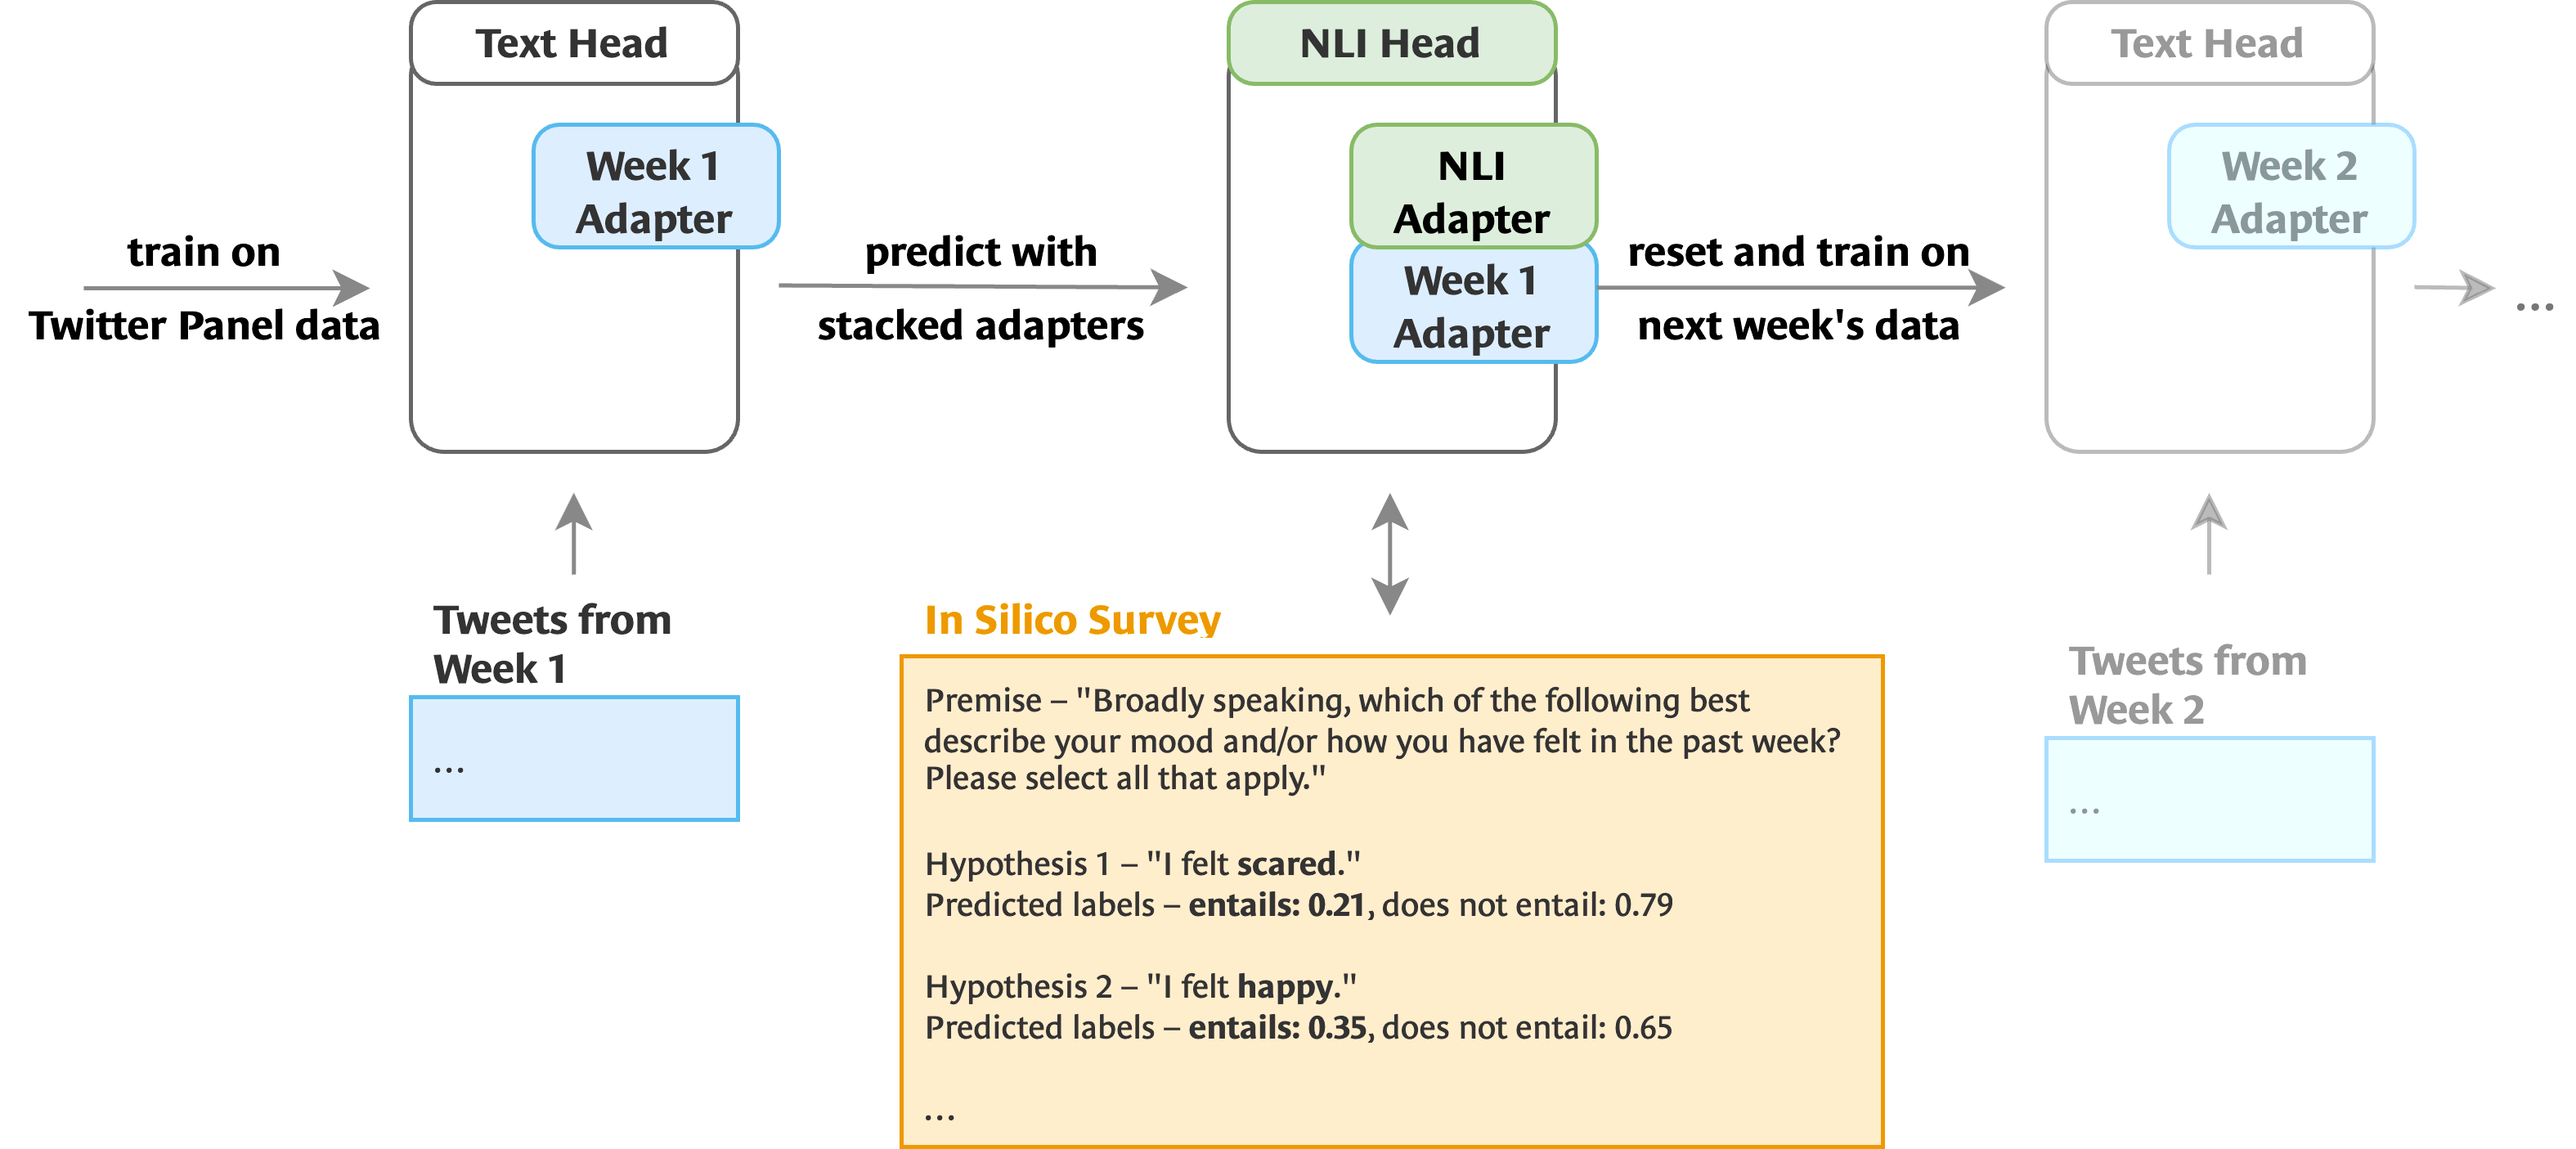 Proposed
setup for in silico longitudinal surveys as demonstrated in our initial
implementation.